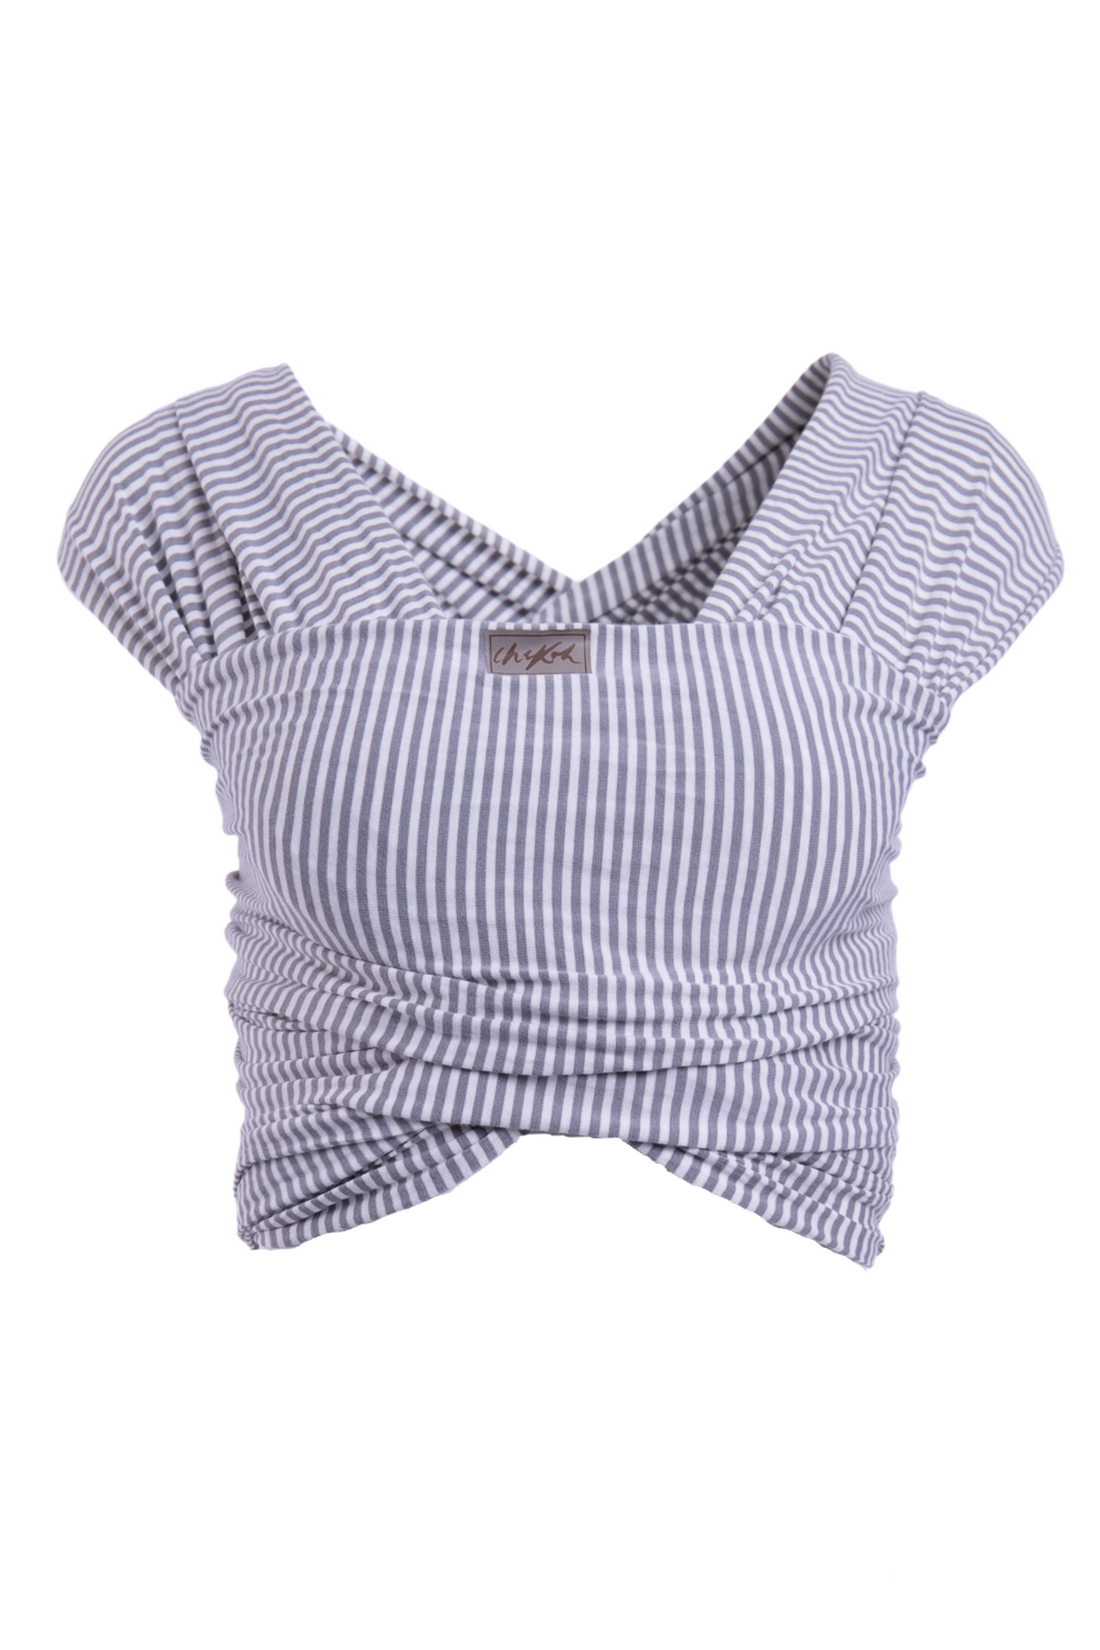 bestselling grey stripe neutral best stretchy wrap carrier from australia chekoh best bamboo baby carrier for newborn